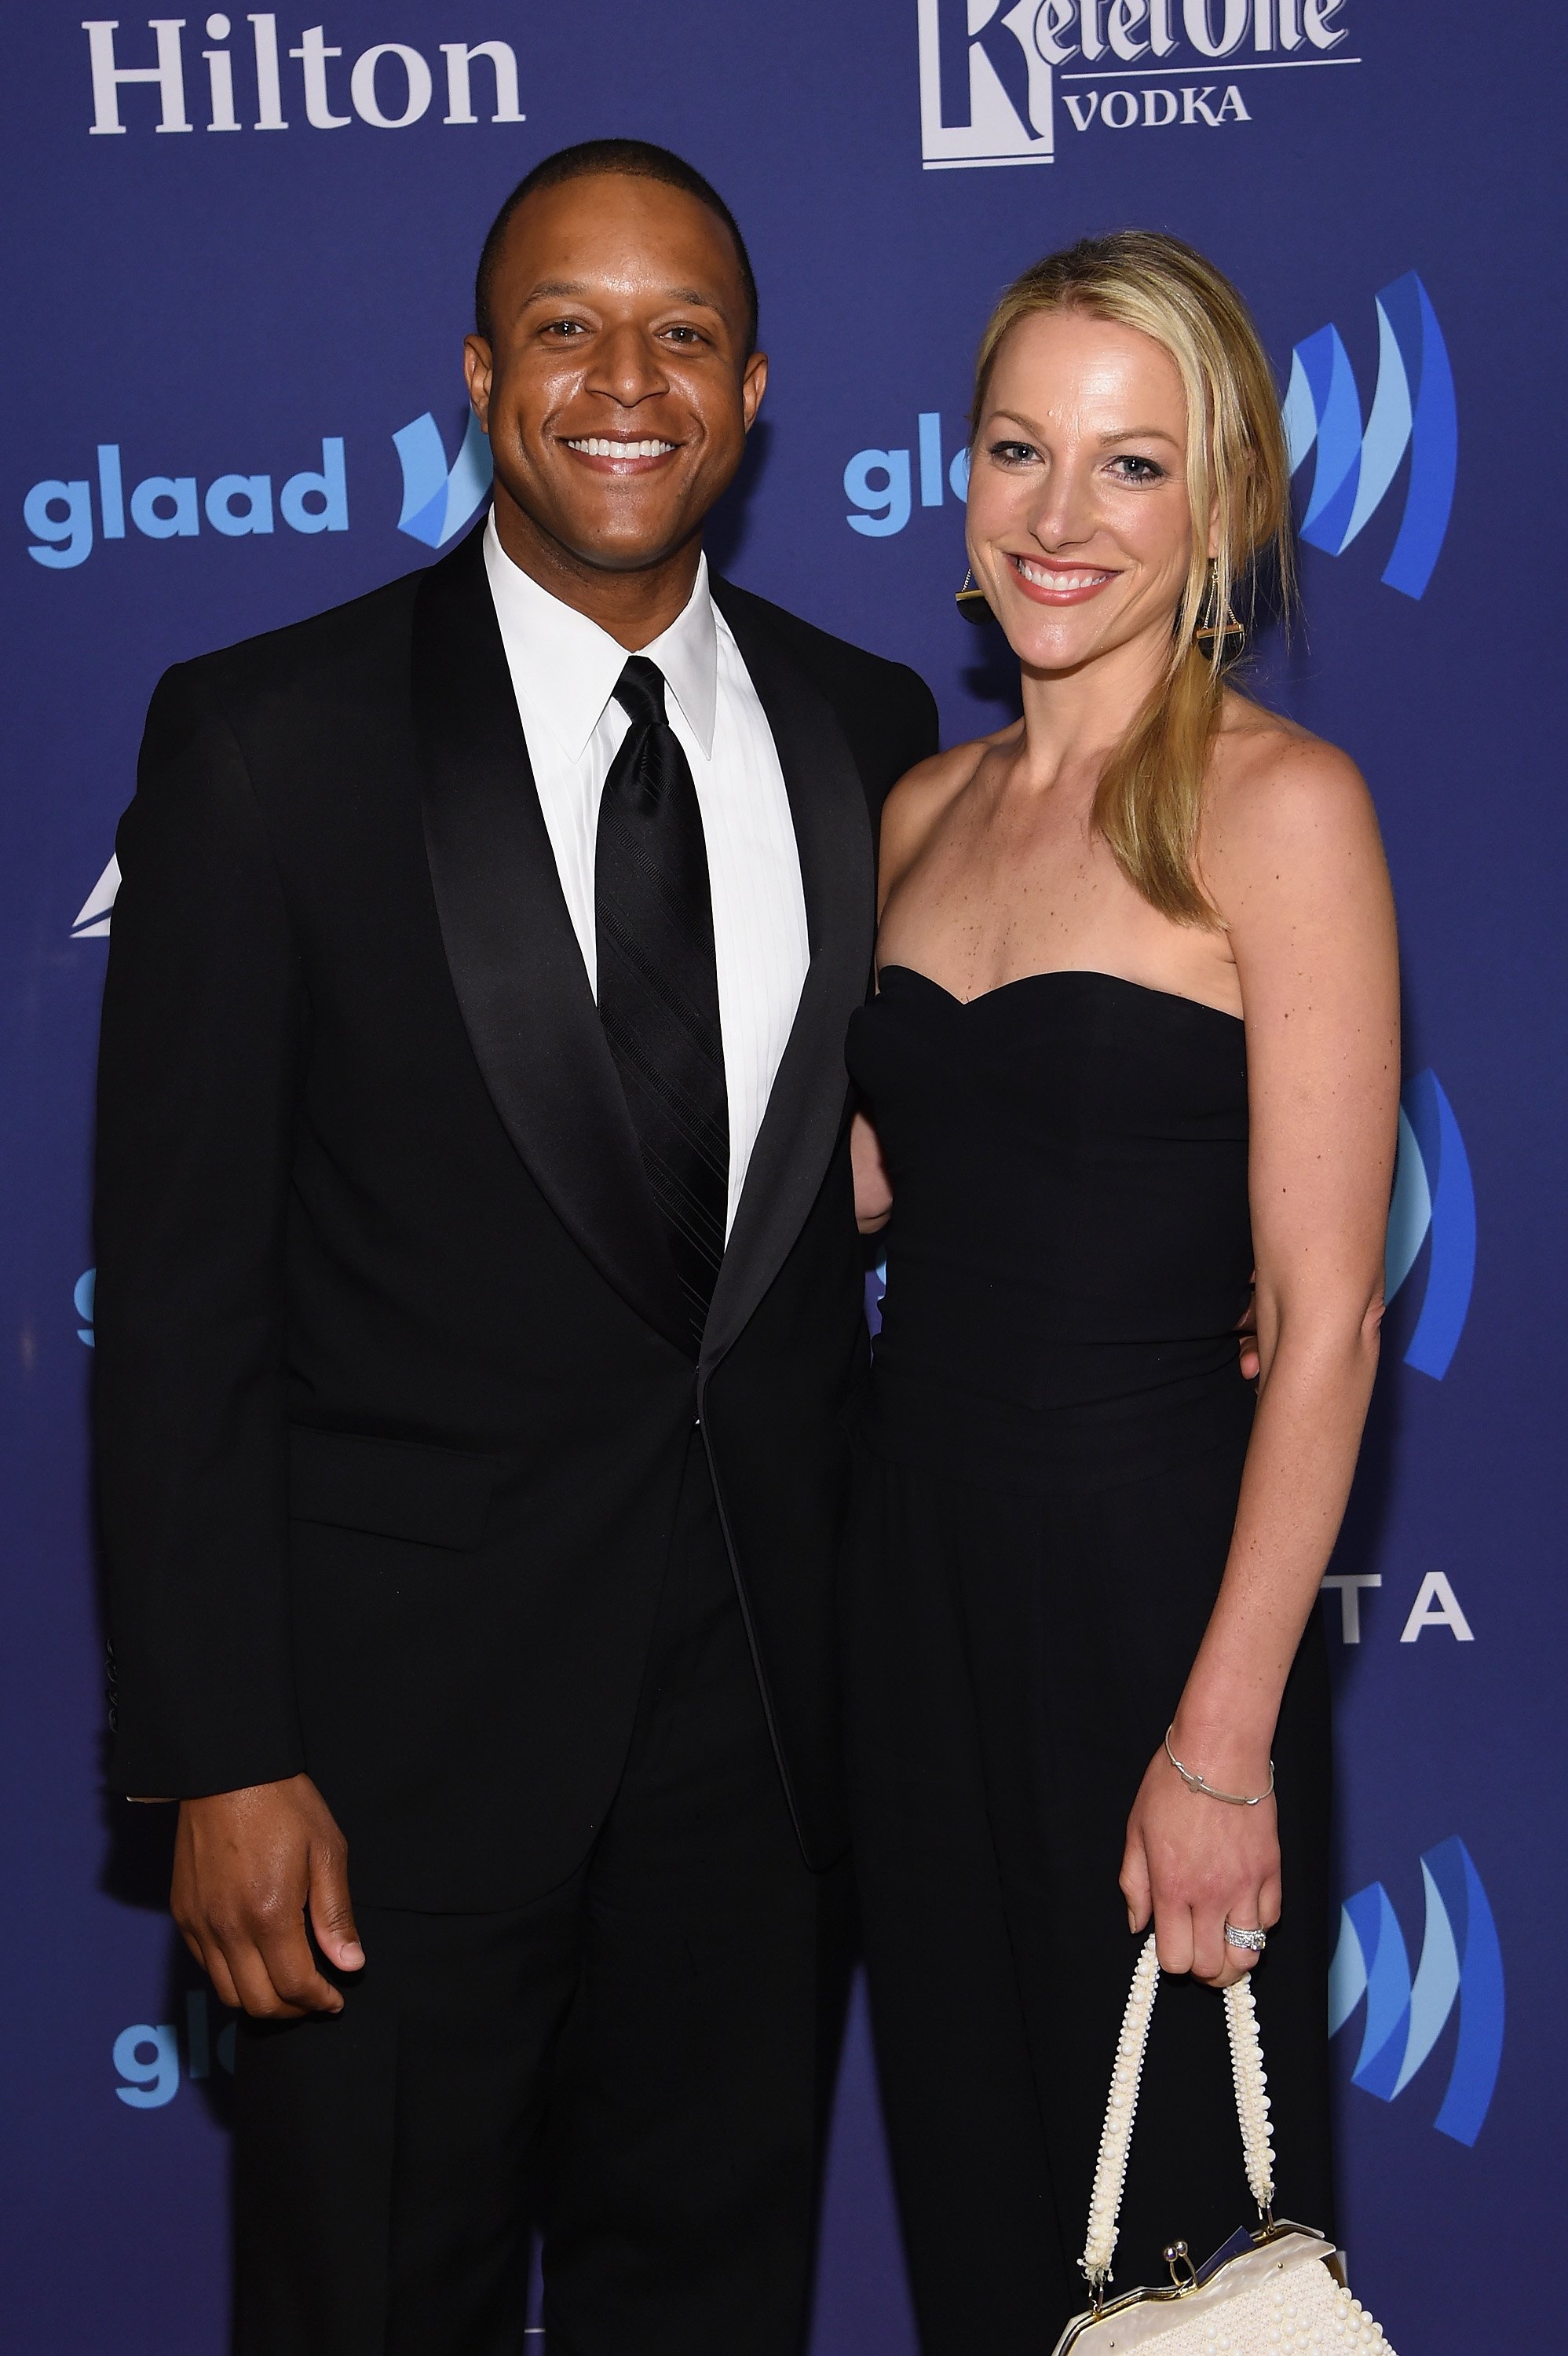  Lindsay Czarniak and Craig Melvin in New York 2015 | Source: Getty Images